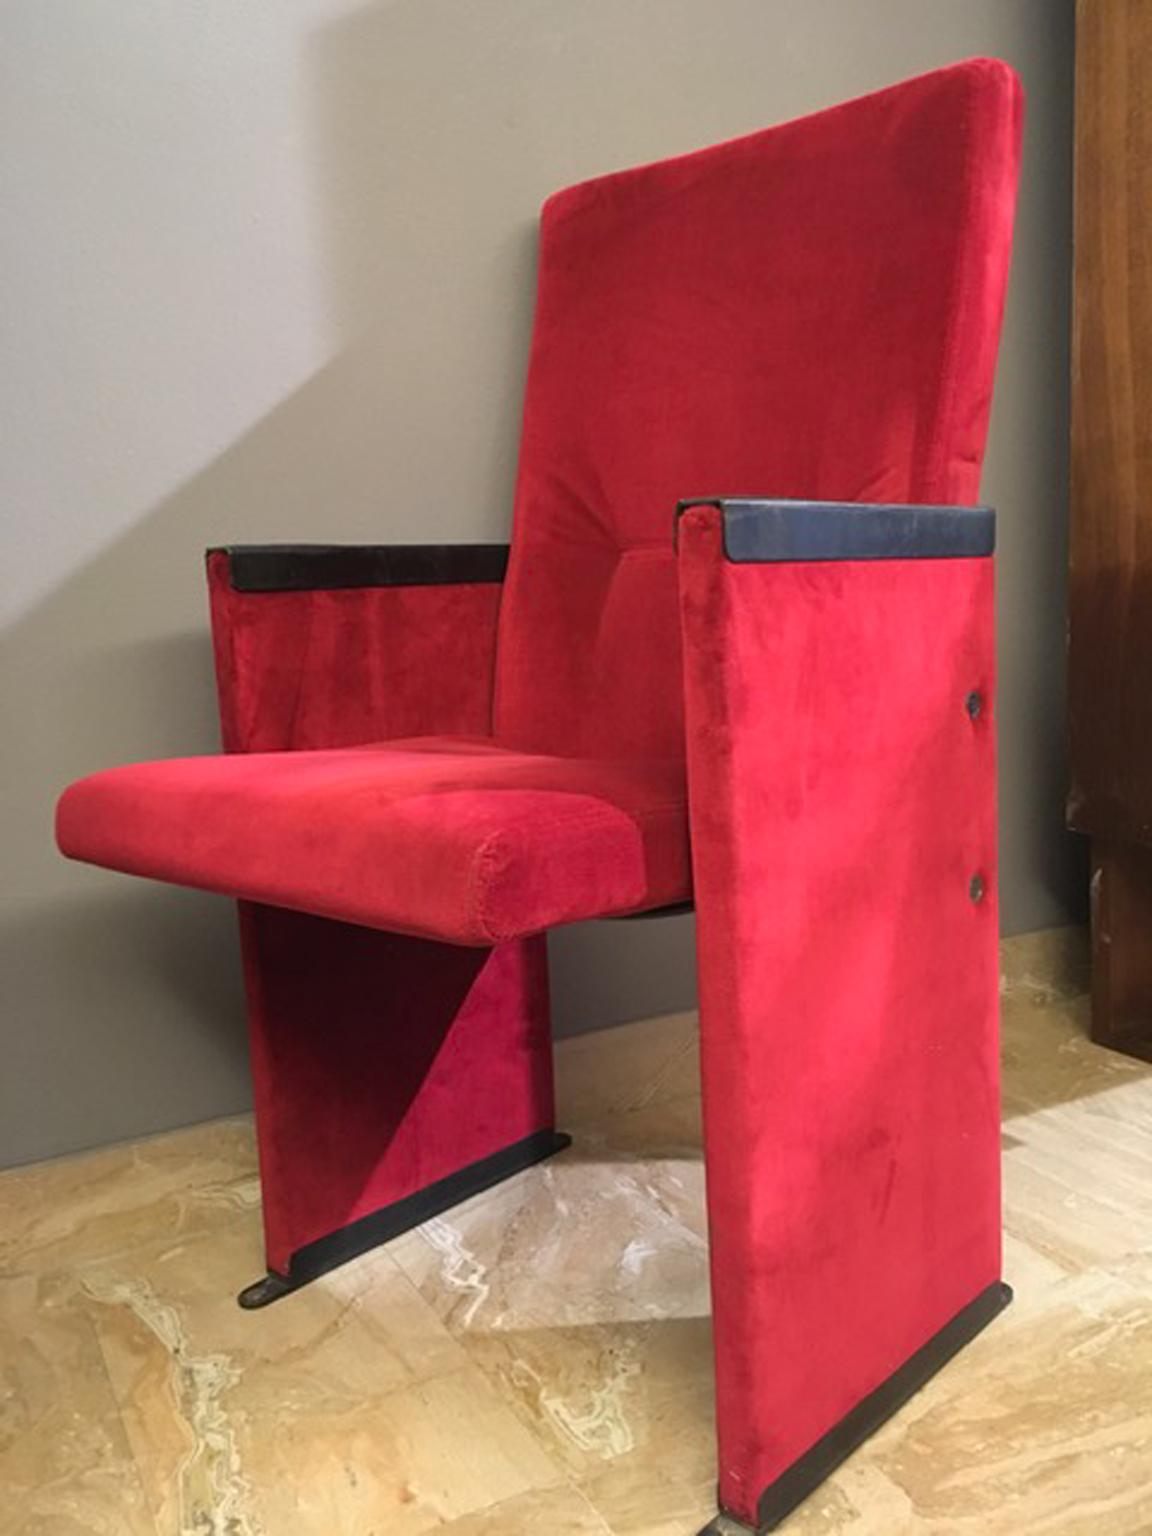 This is a set of Carlo Scarpa armchairs designed and realized for the Auditorium in Rome, project by the Italian architect Marcello Piacentini, built in 1960. For the interior design proiect was called Carlo Scarpa.
Every armachairs has its number